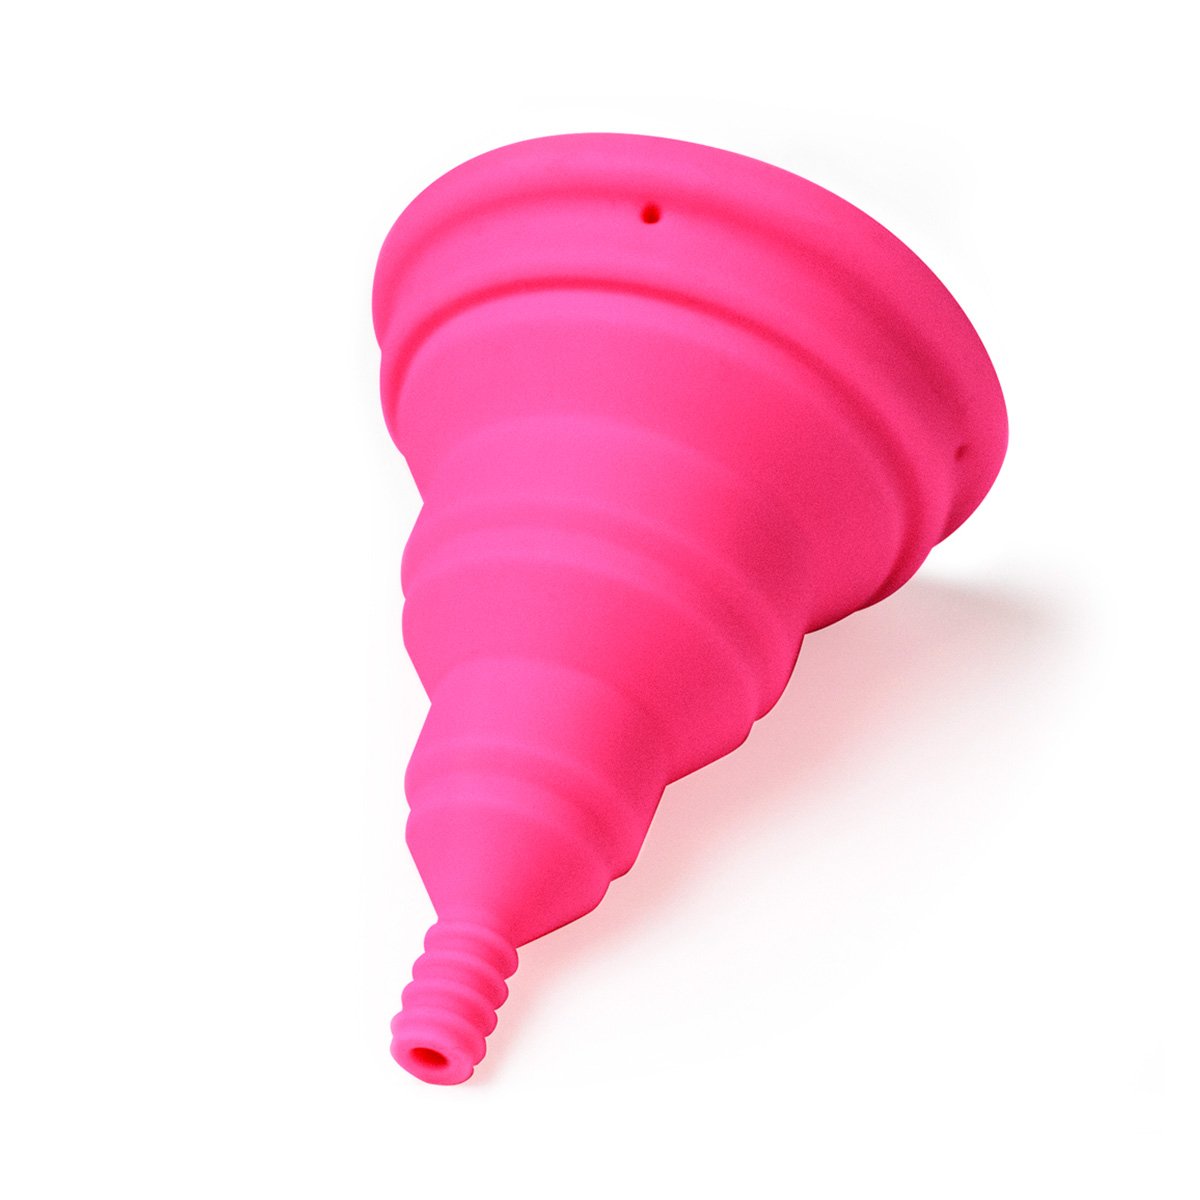 Copa Menstrual Lily Cup Compact Intimina